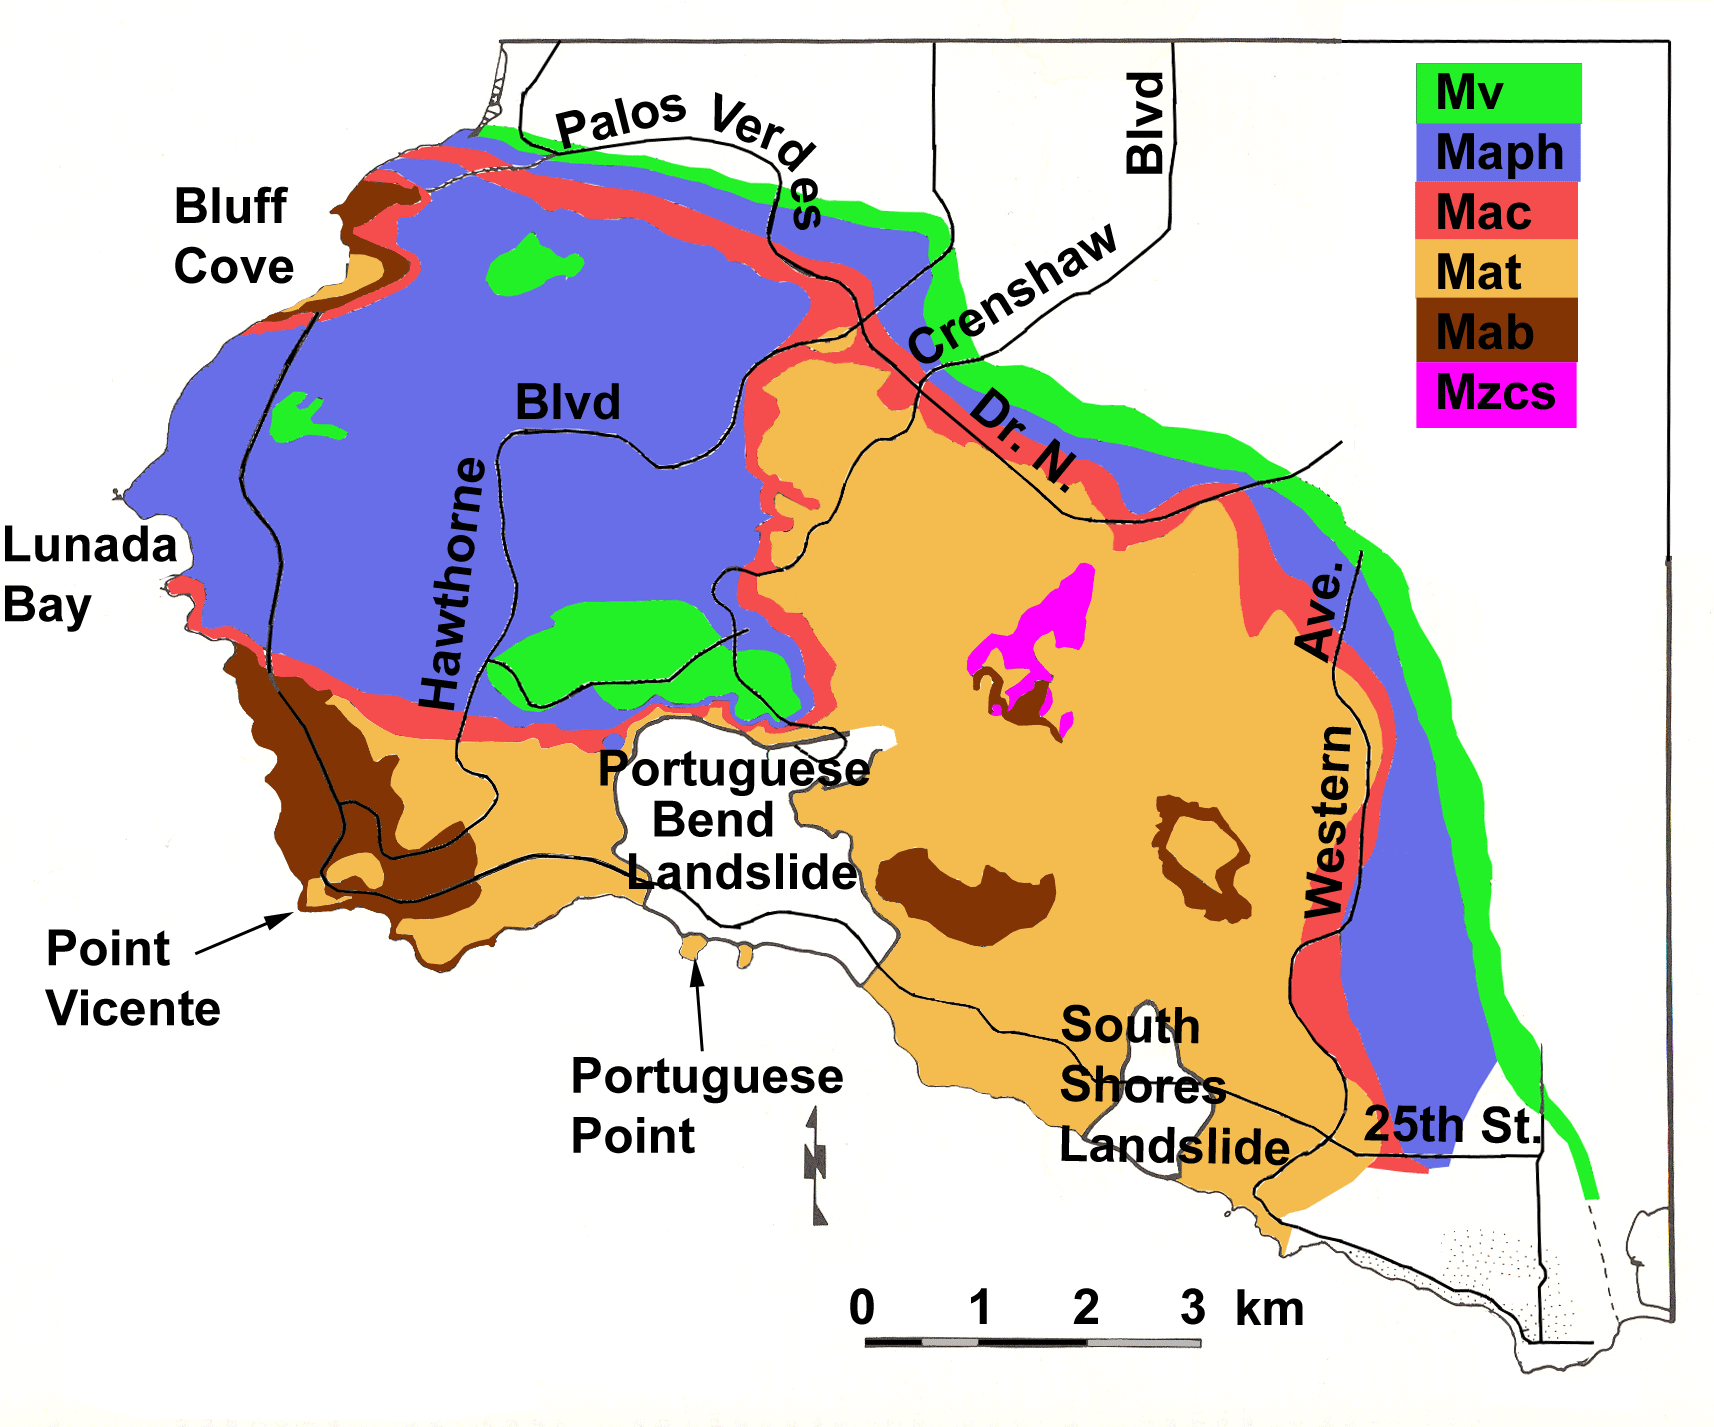 Image showing geology published by Conrad and Ehlig (1987).